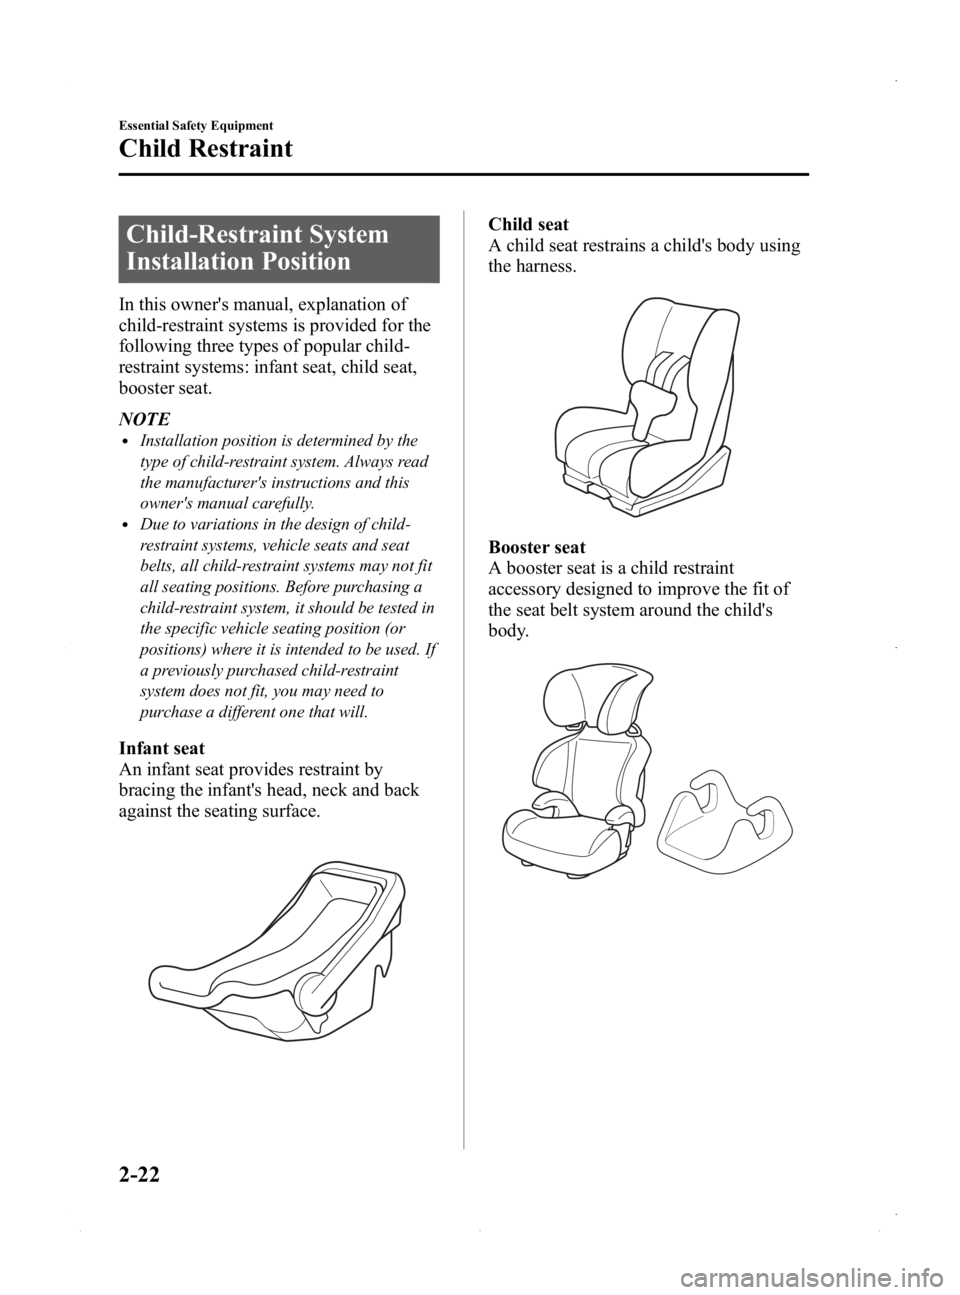 MAZDA MODEL MX-5 MIATA PRHT 2015 Owners Guide Black plate (34,1)
Child-Restraint System
Installation Position
In this owners manual, explanation of
child-restraint systems is provided for the
following three types of popular child-
restraint sys